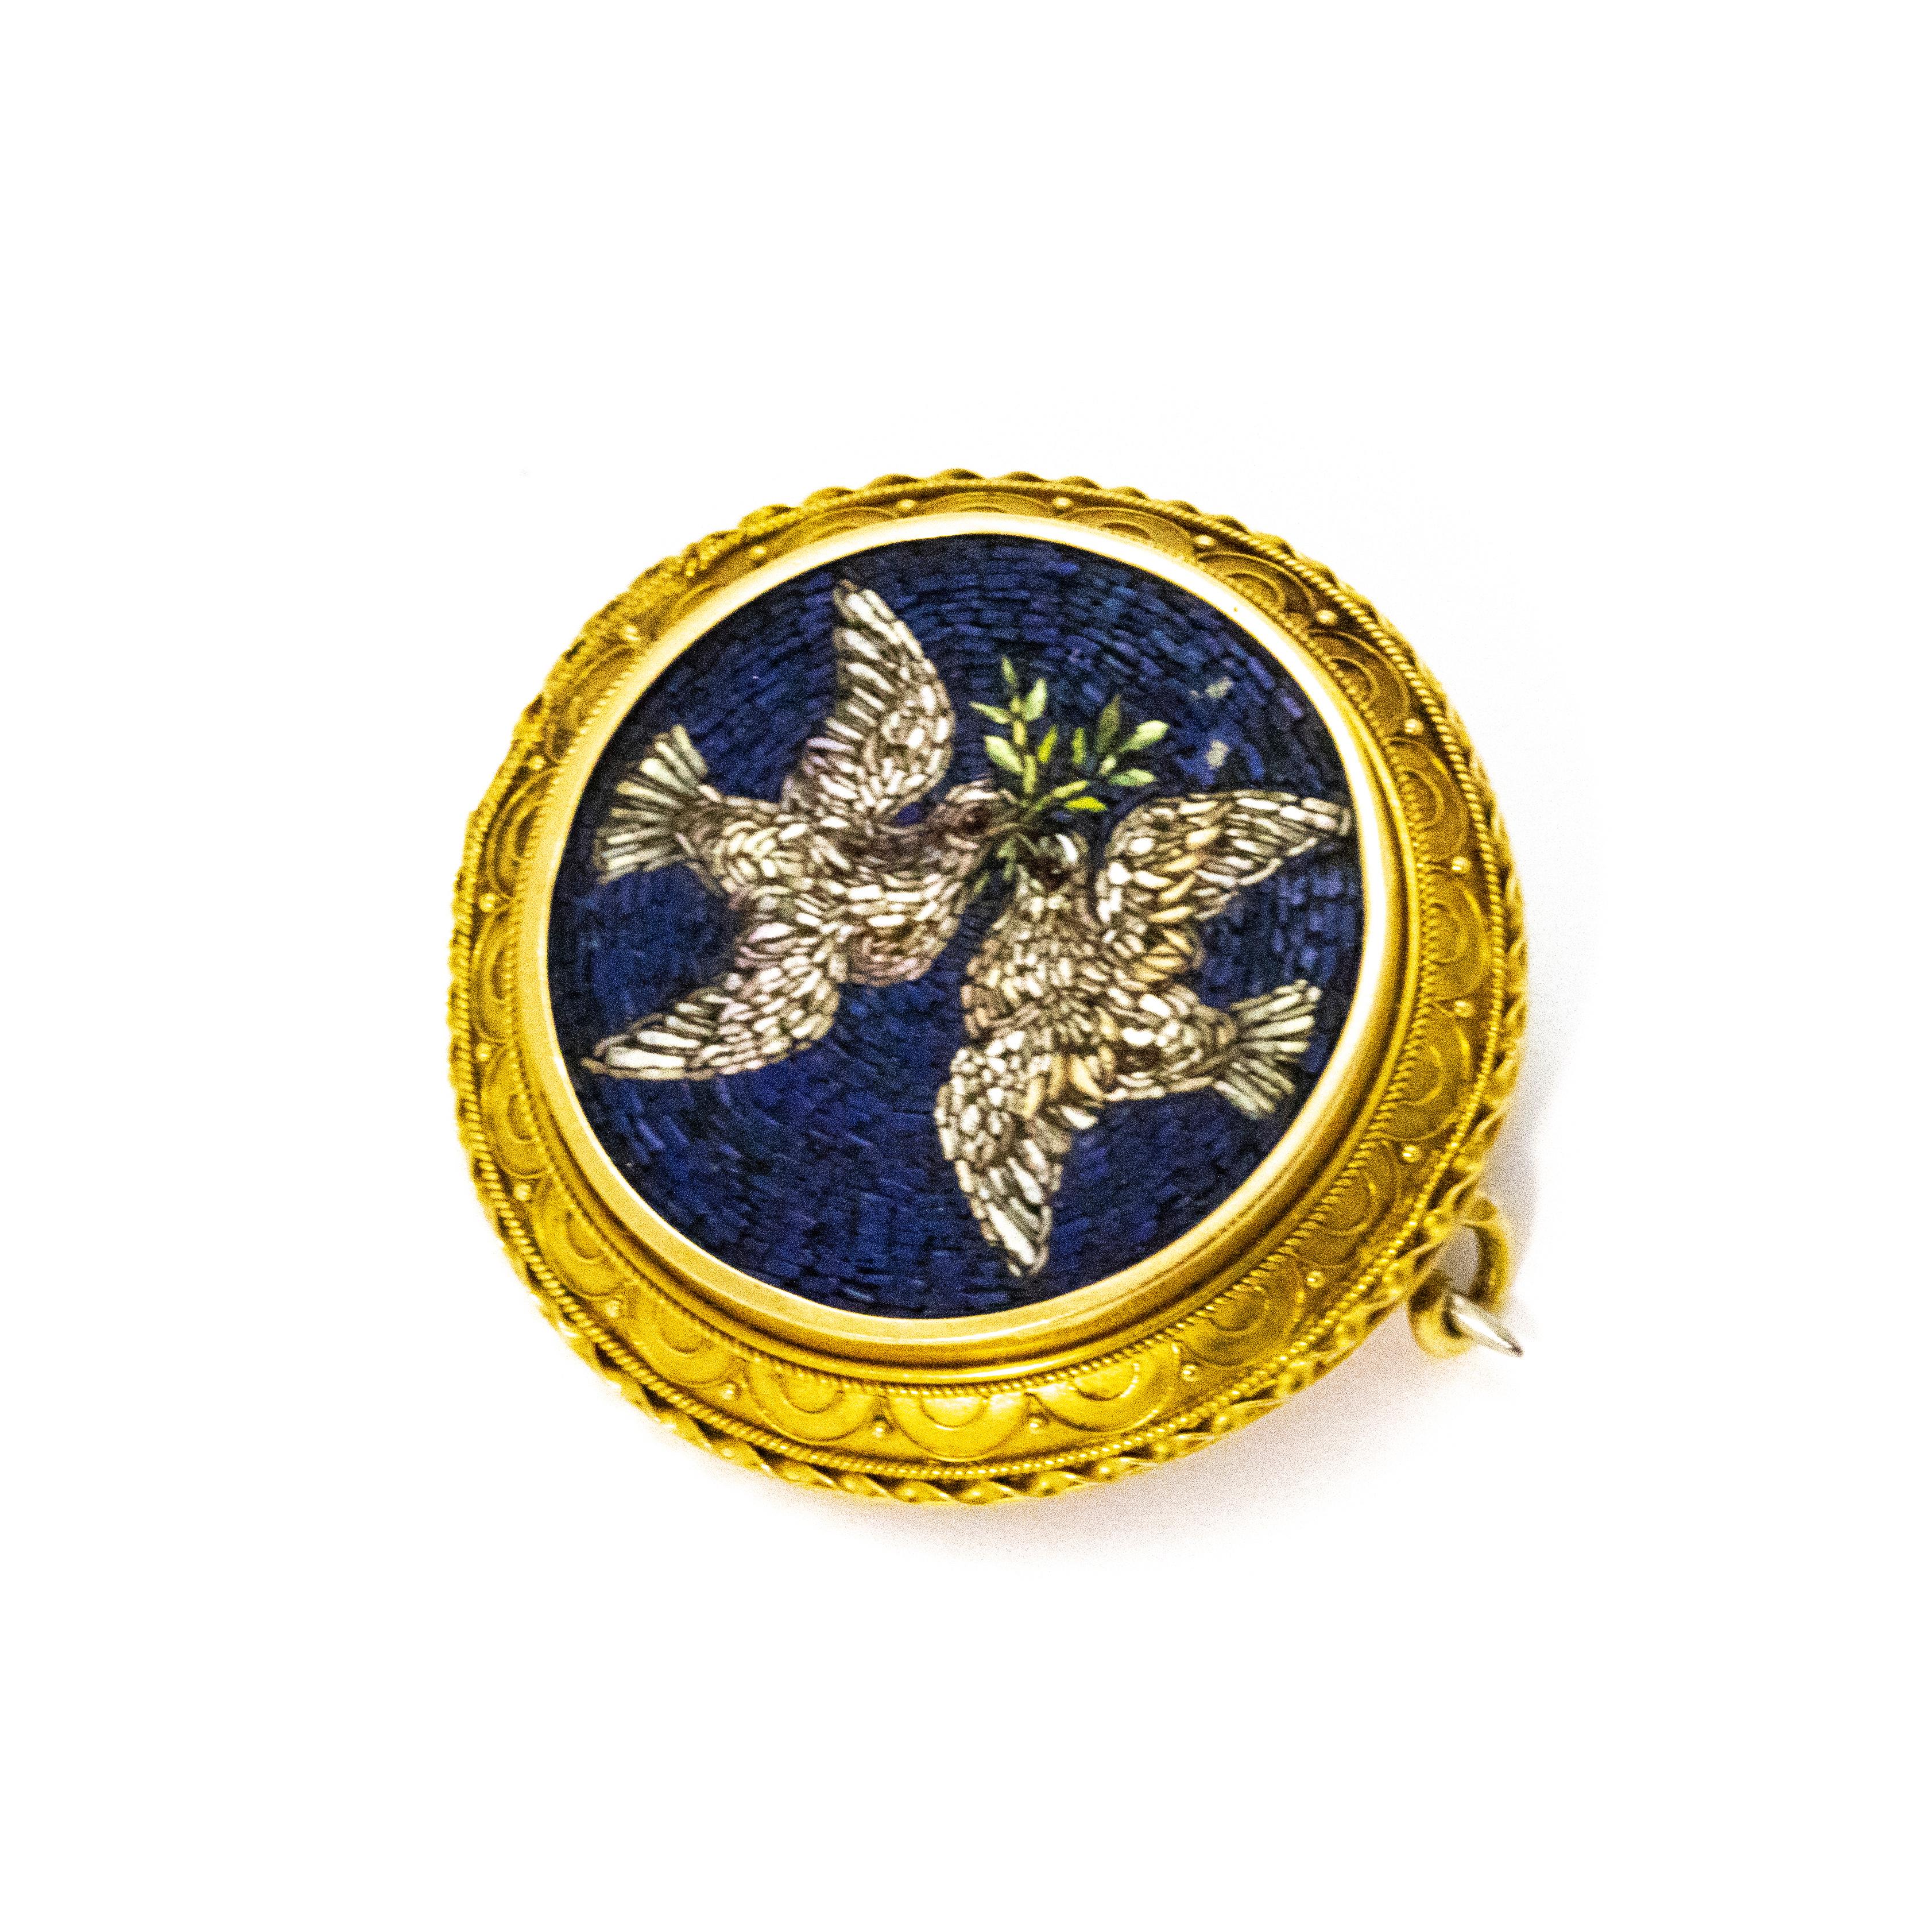 Stunning micro mosaic brooch with intricate 18ct gold setting and surround. Two doves are pictured with olive branches which symbolise peace.

Brooch Diameter: just under 1 1/2 inches